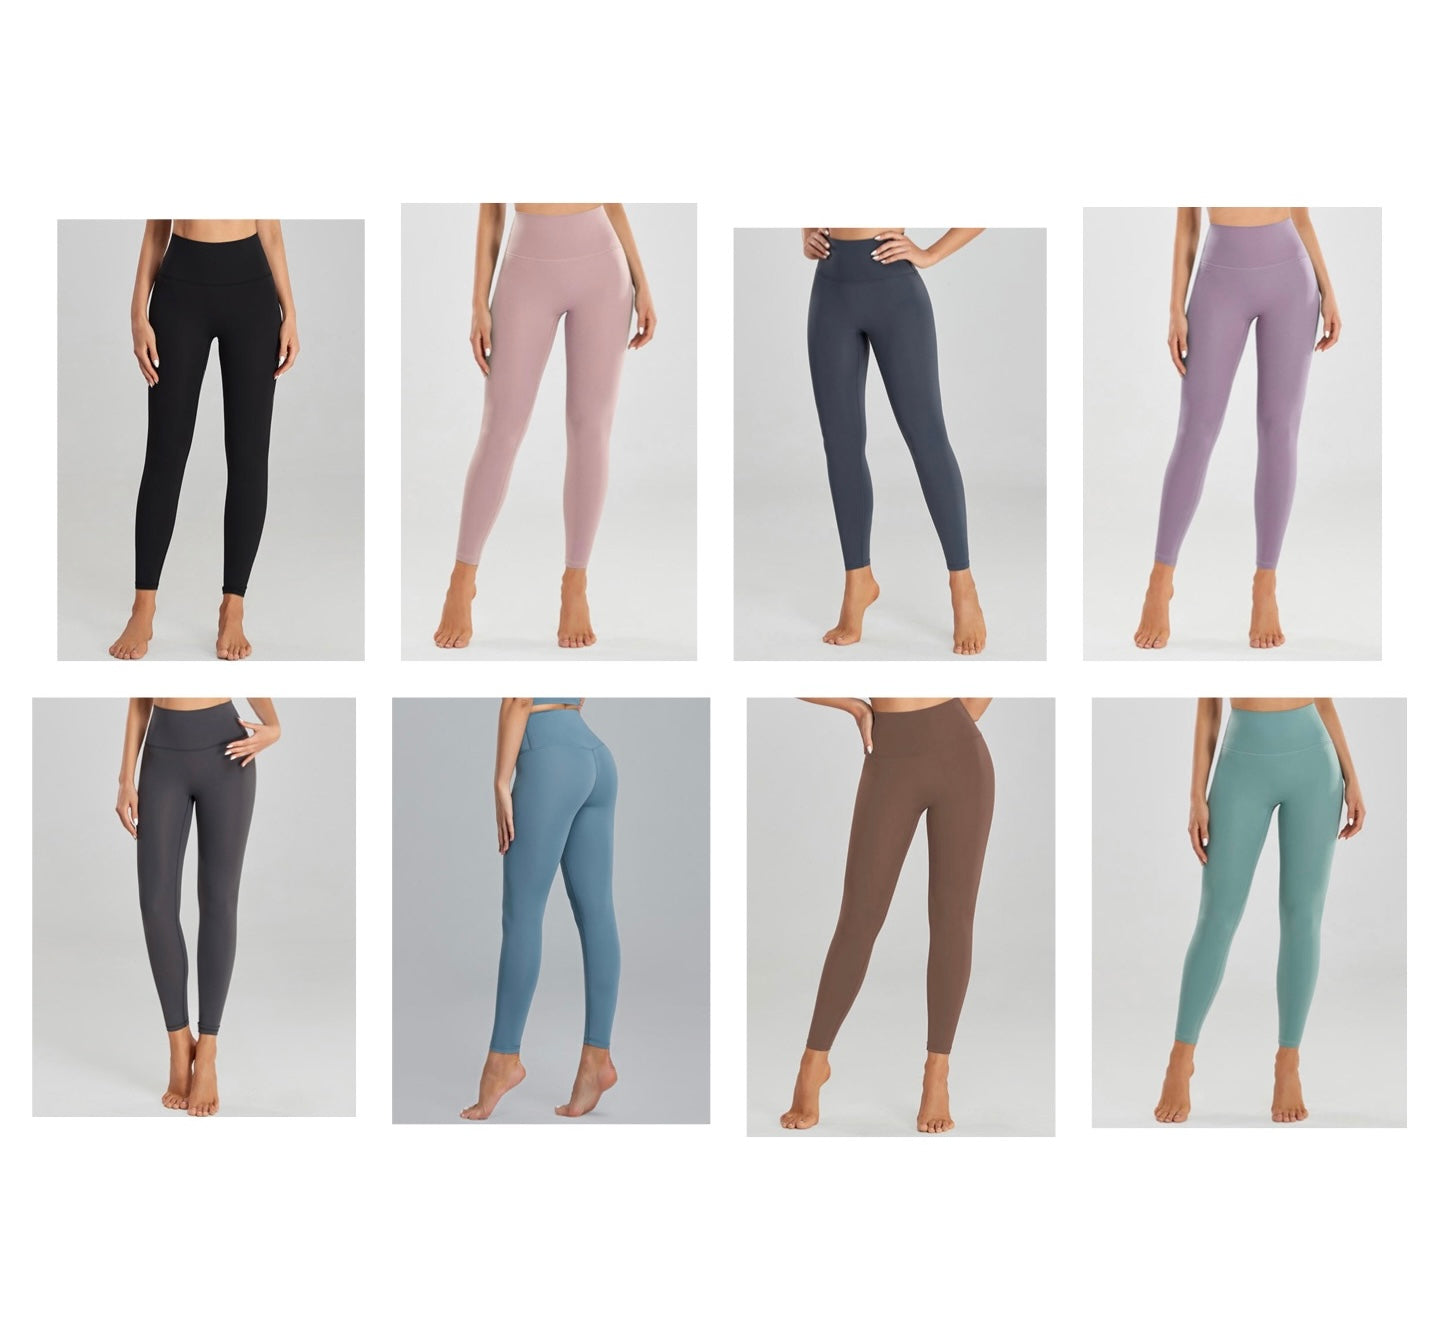 Everyday/ Curves seamless high compression leggings (sizing up to 3XL) - size up